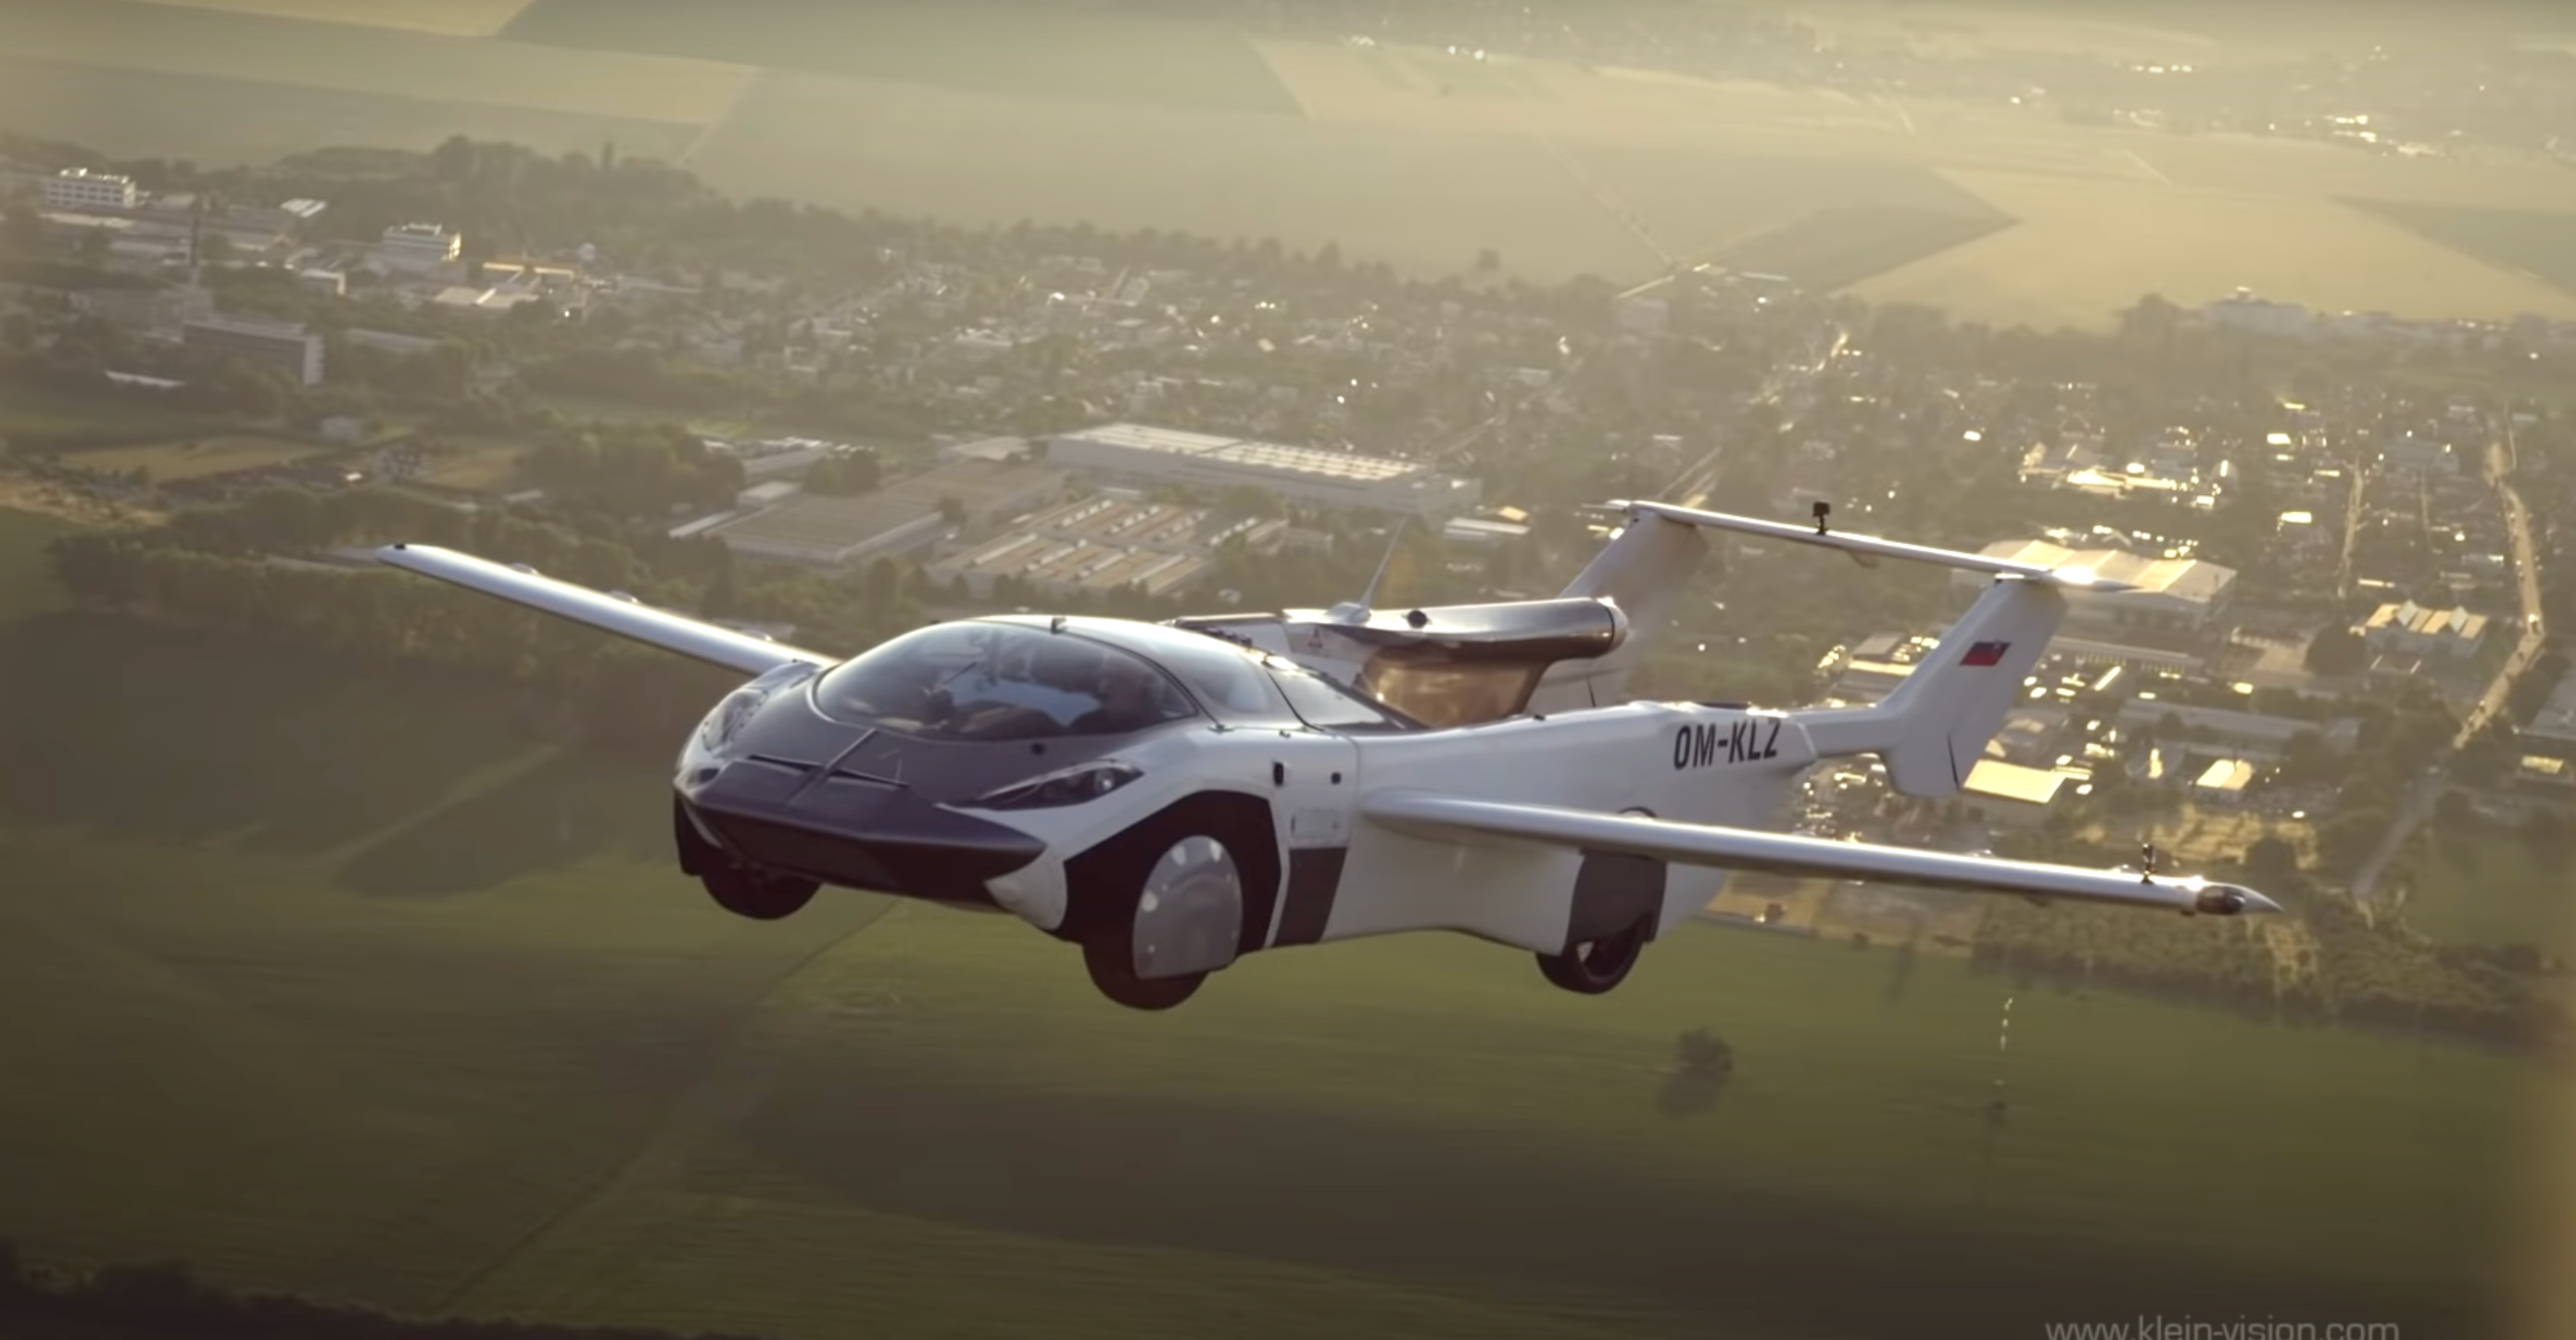 AirCar during its 35-minute flight from the international airport in Nitra to the international airport in Bratislava, Slovakia